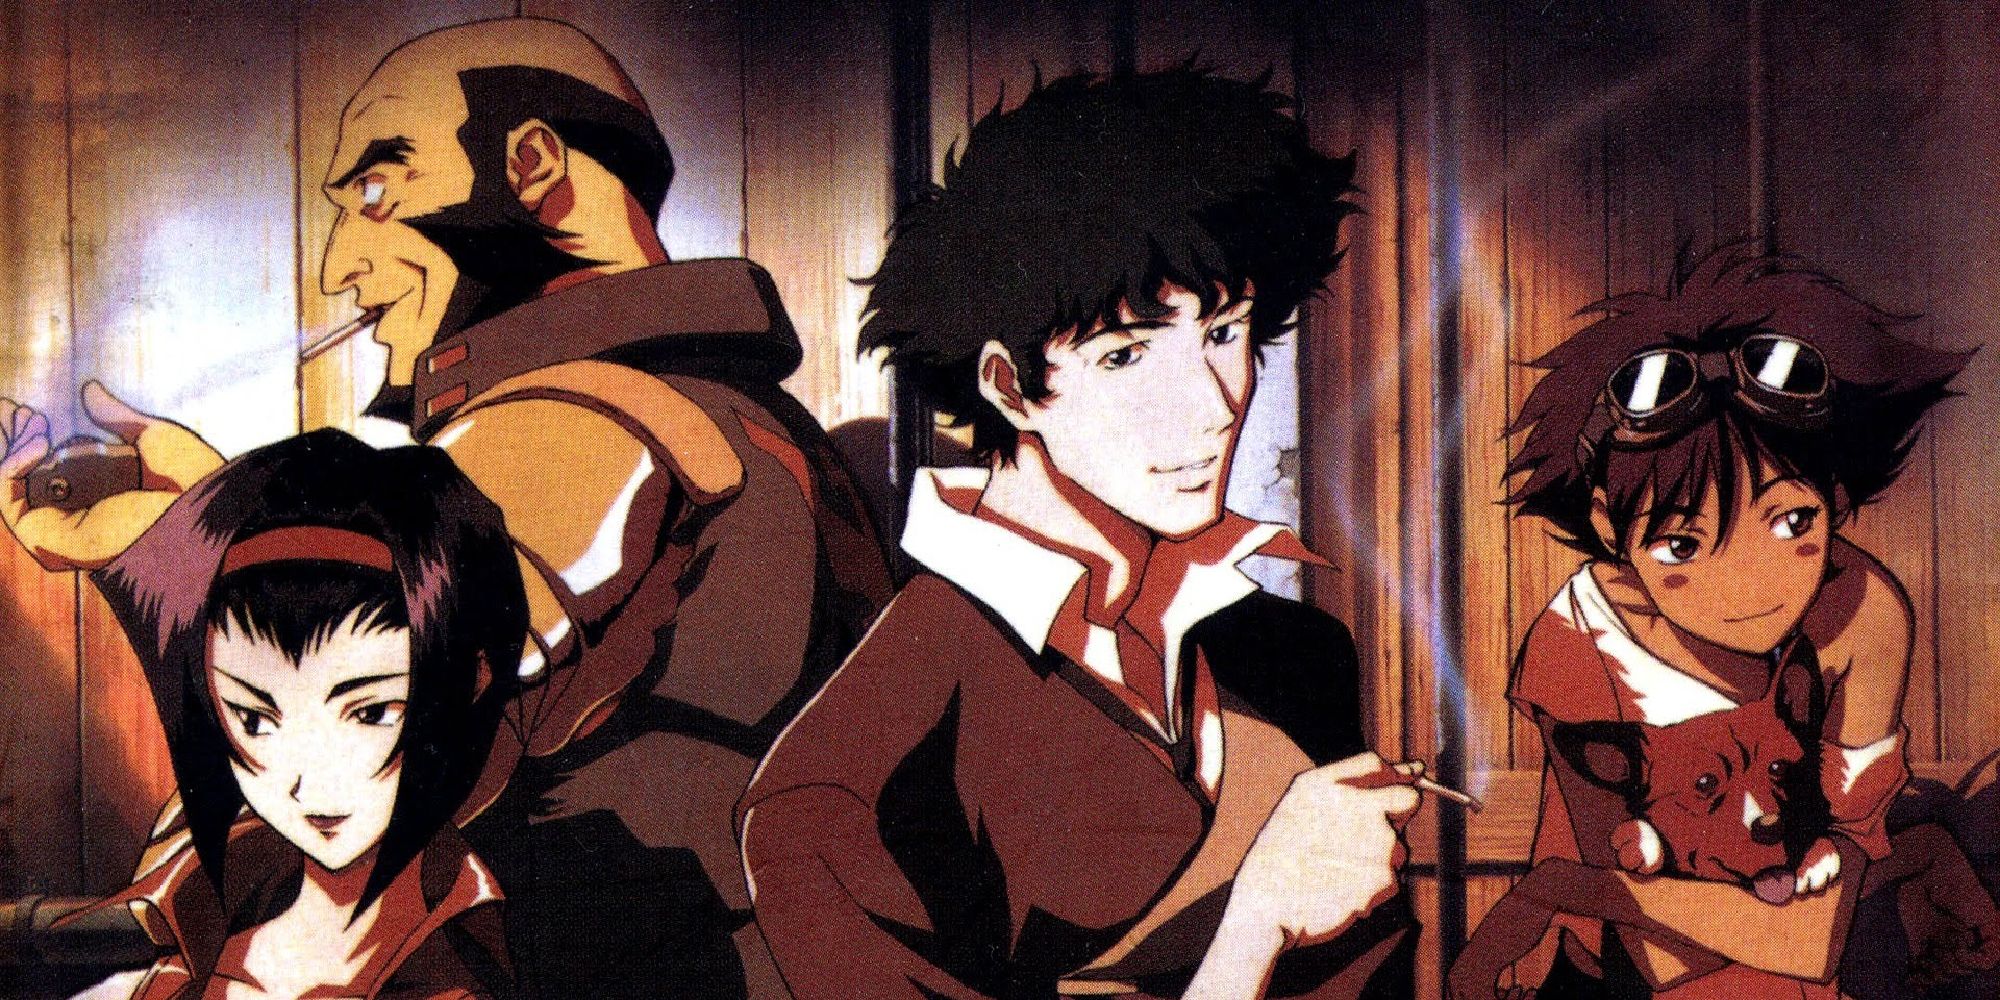 ‘Cowboy Bebop’s 25th Anniversary Celebrated With Special Exhibit